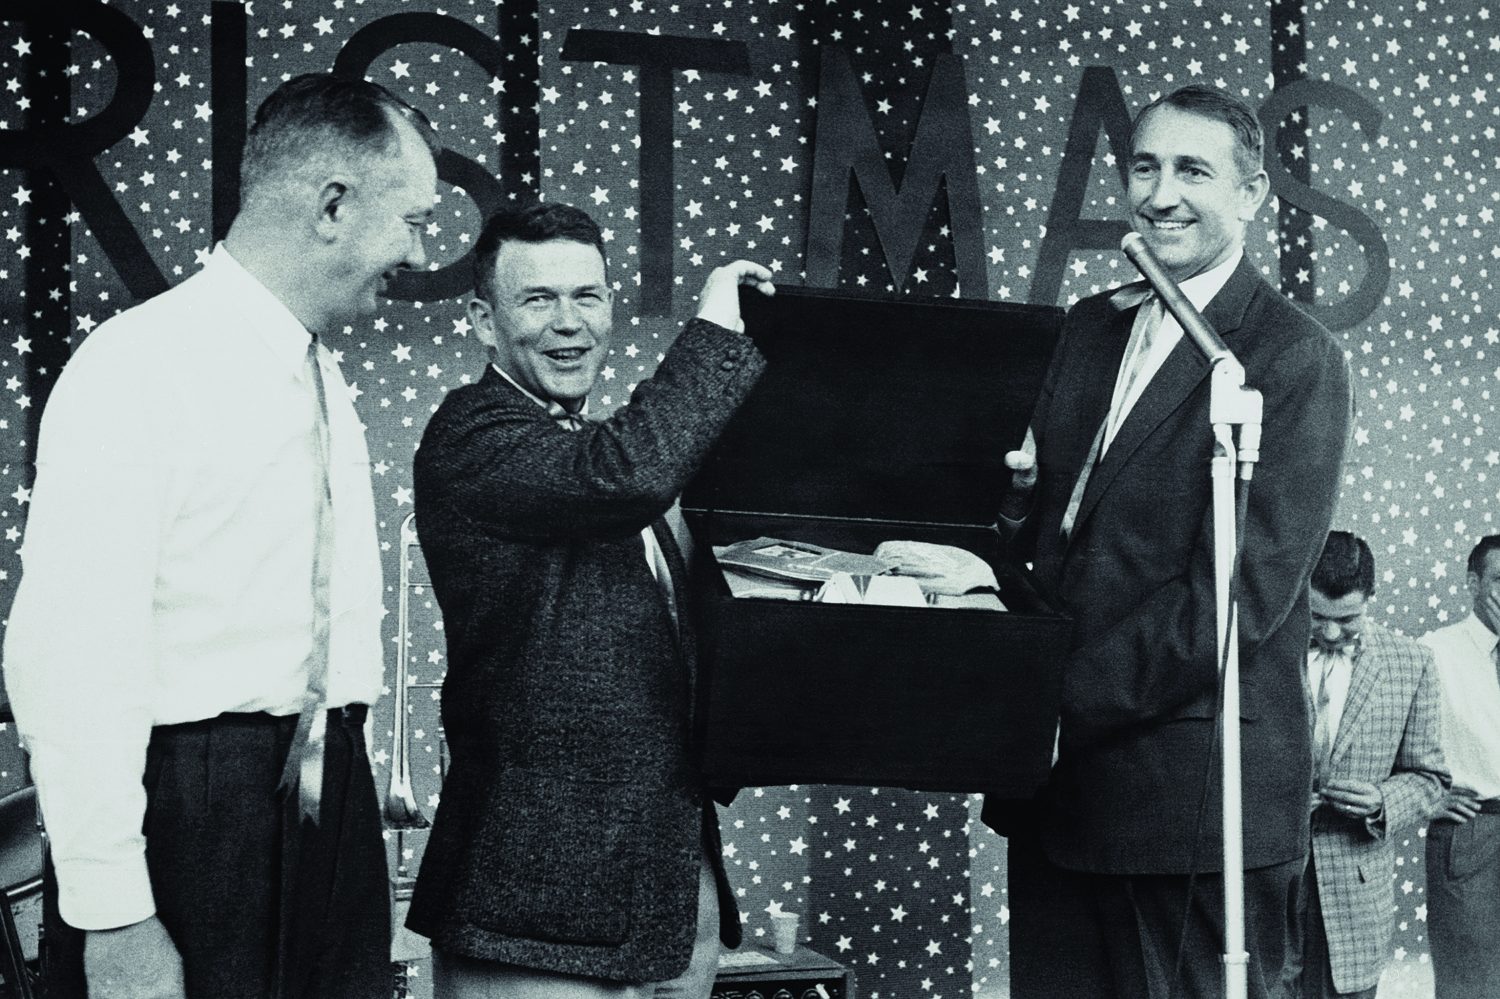 Bill Hewlett and Dave Packard presenting a box of gifts during a Hewlett-Packard holiday party in 1947.